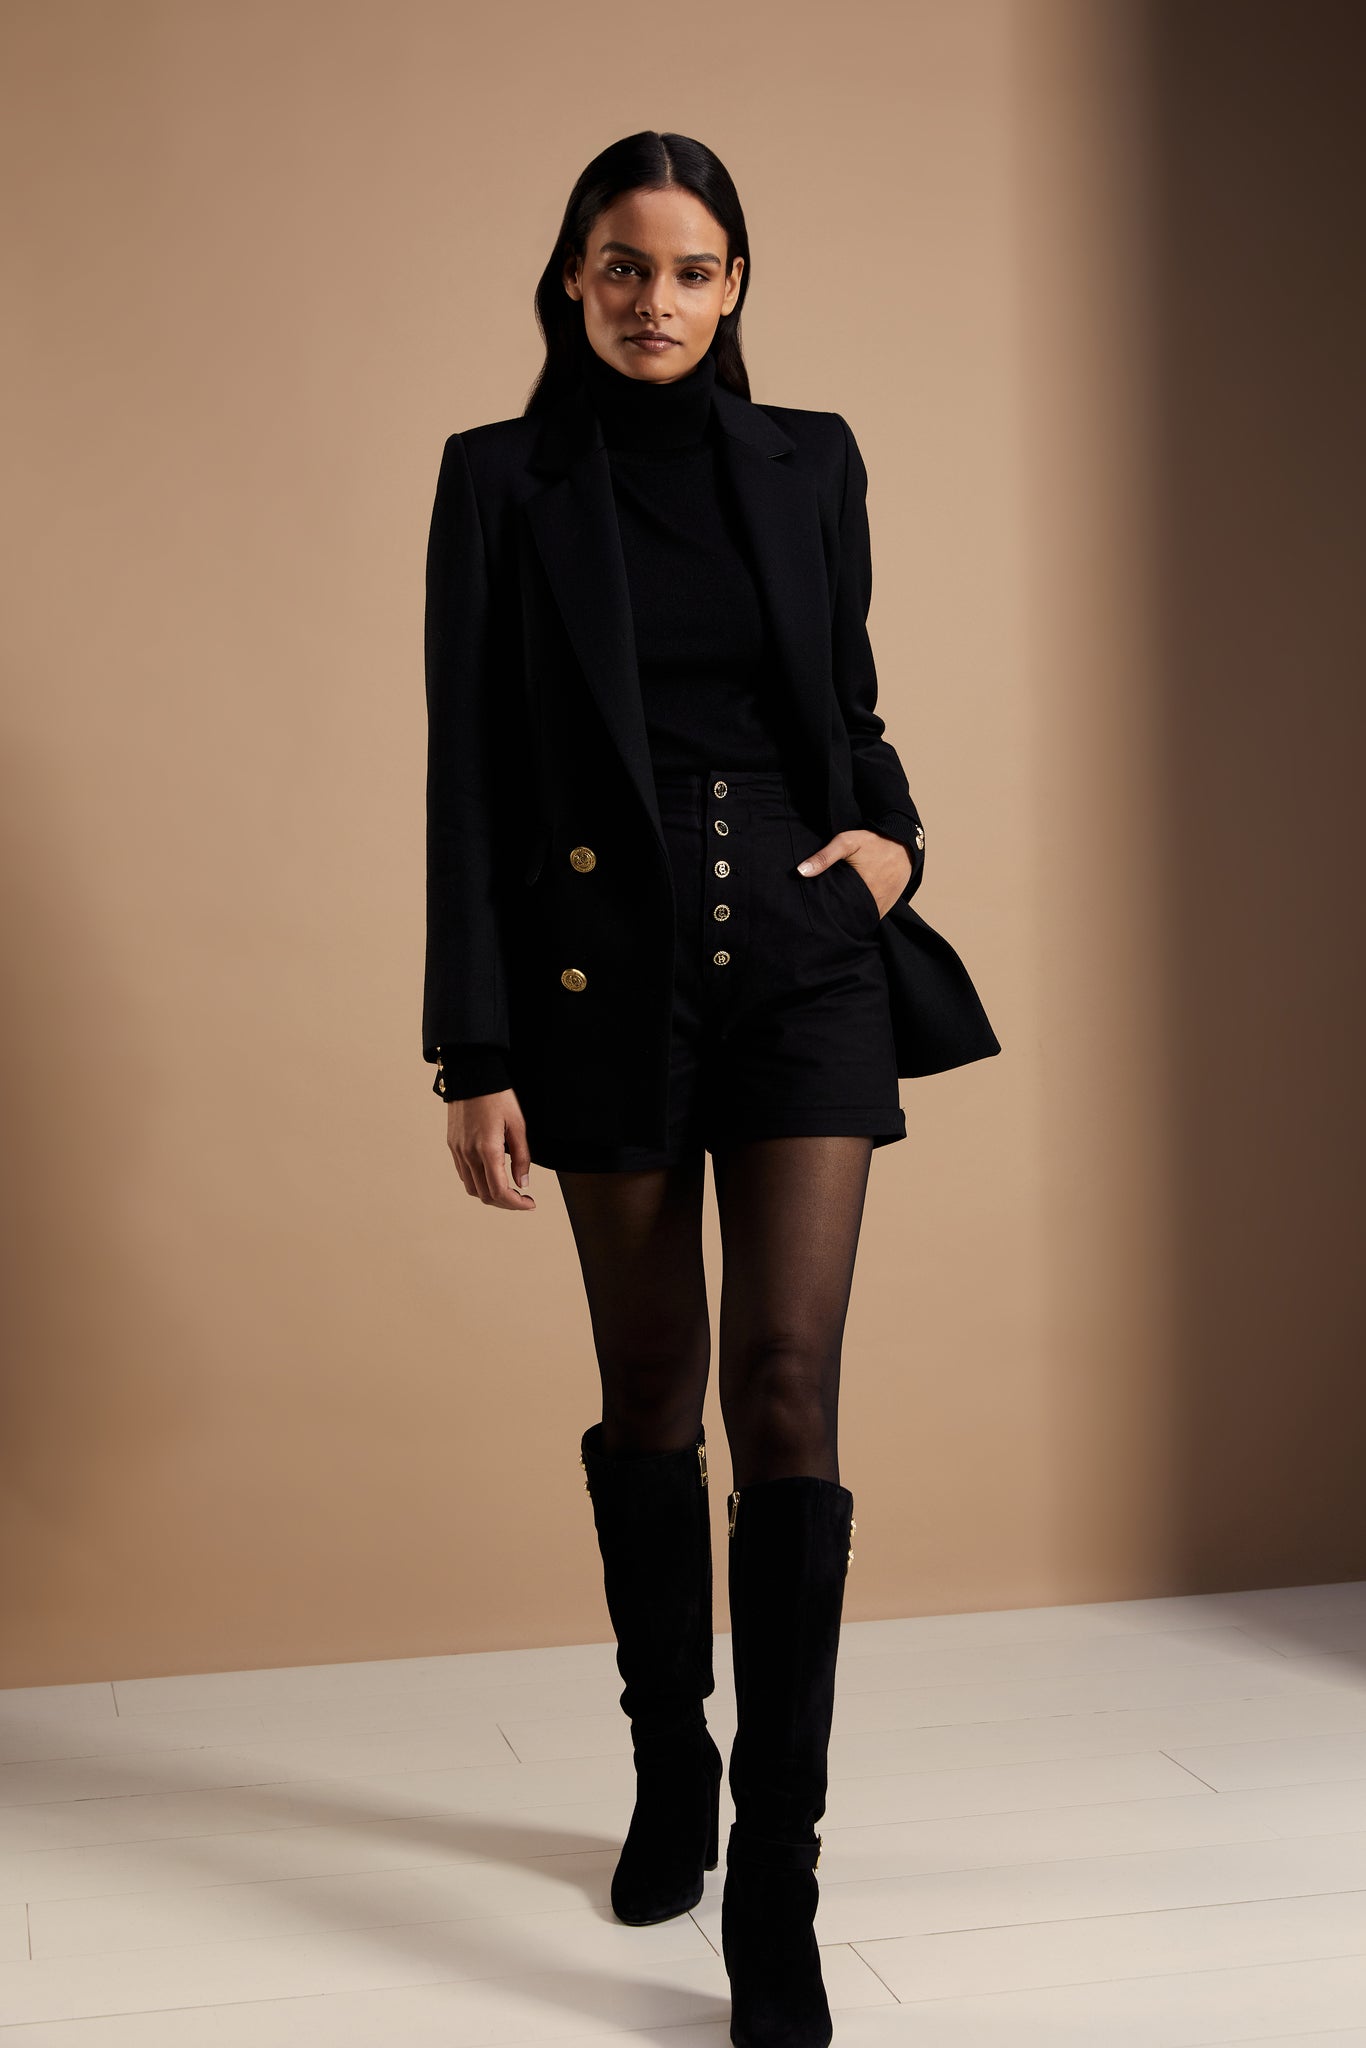 womens black tailored shorts with two single knife pleats and black and gold front button detail with a turned up hem worn with black roll neck and black double breasted blazer